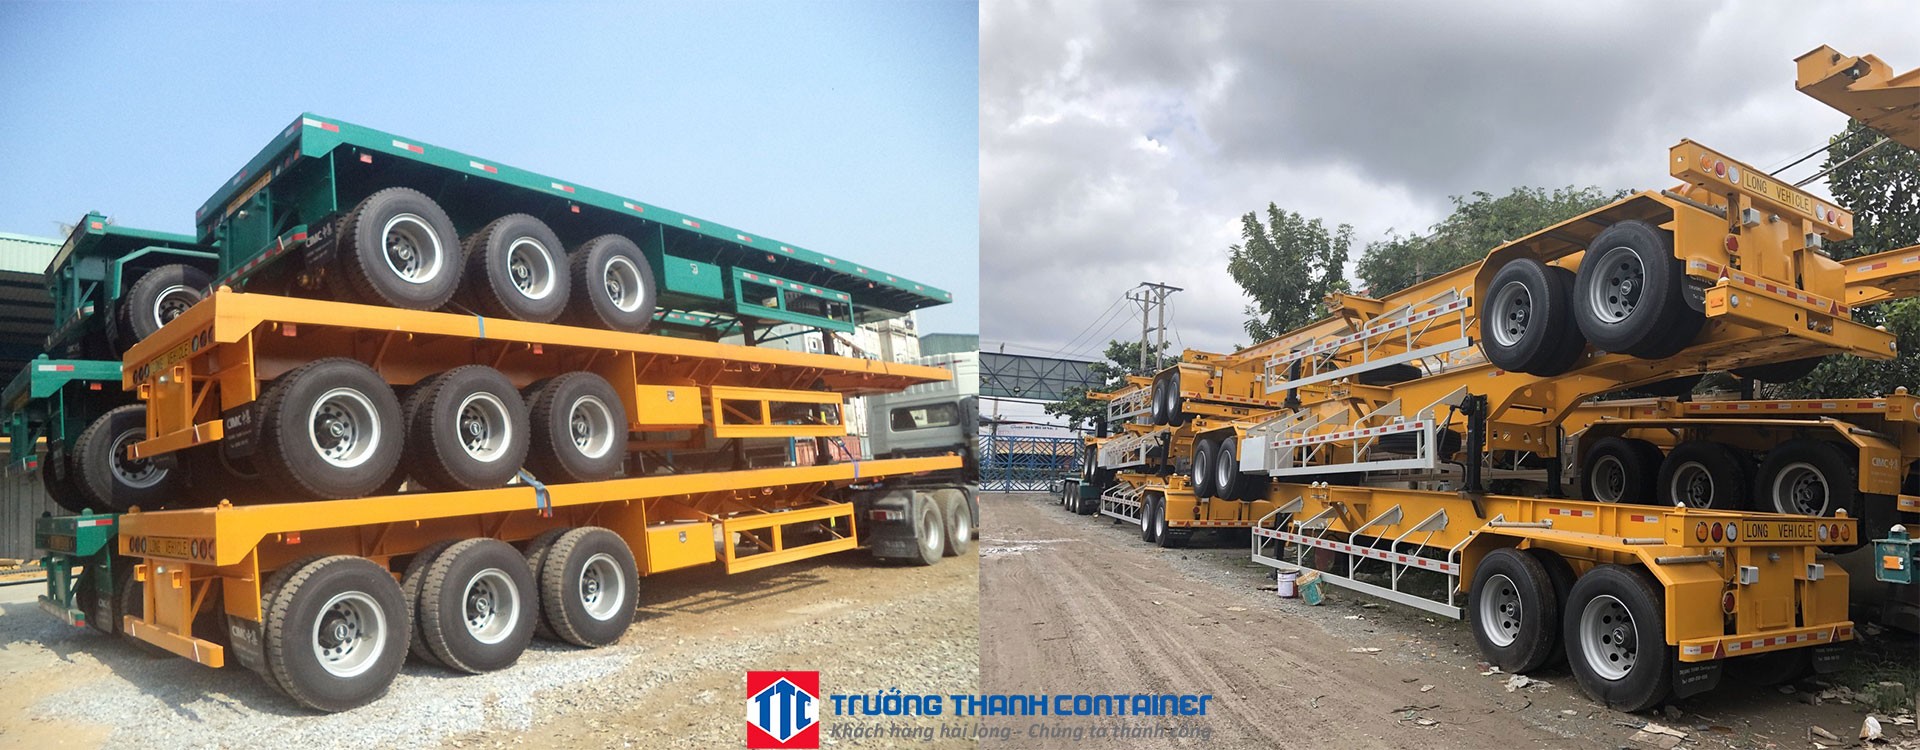 truong thanh container banner 3